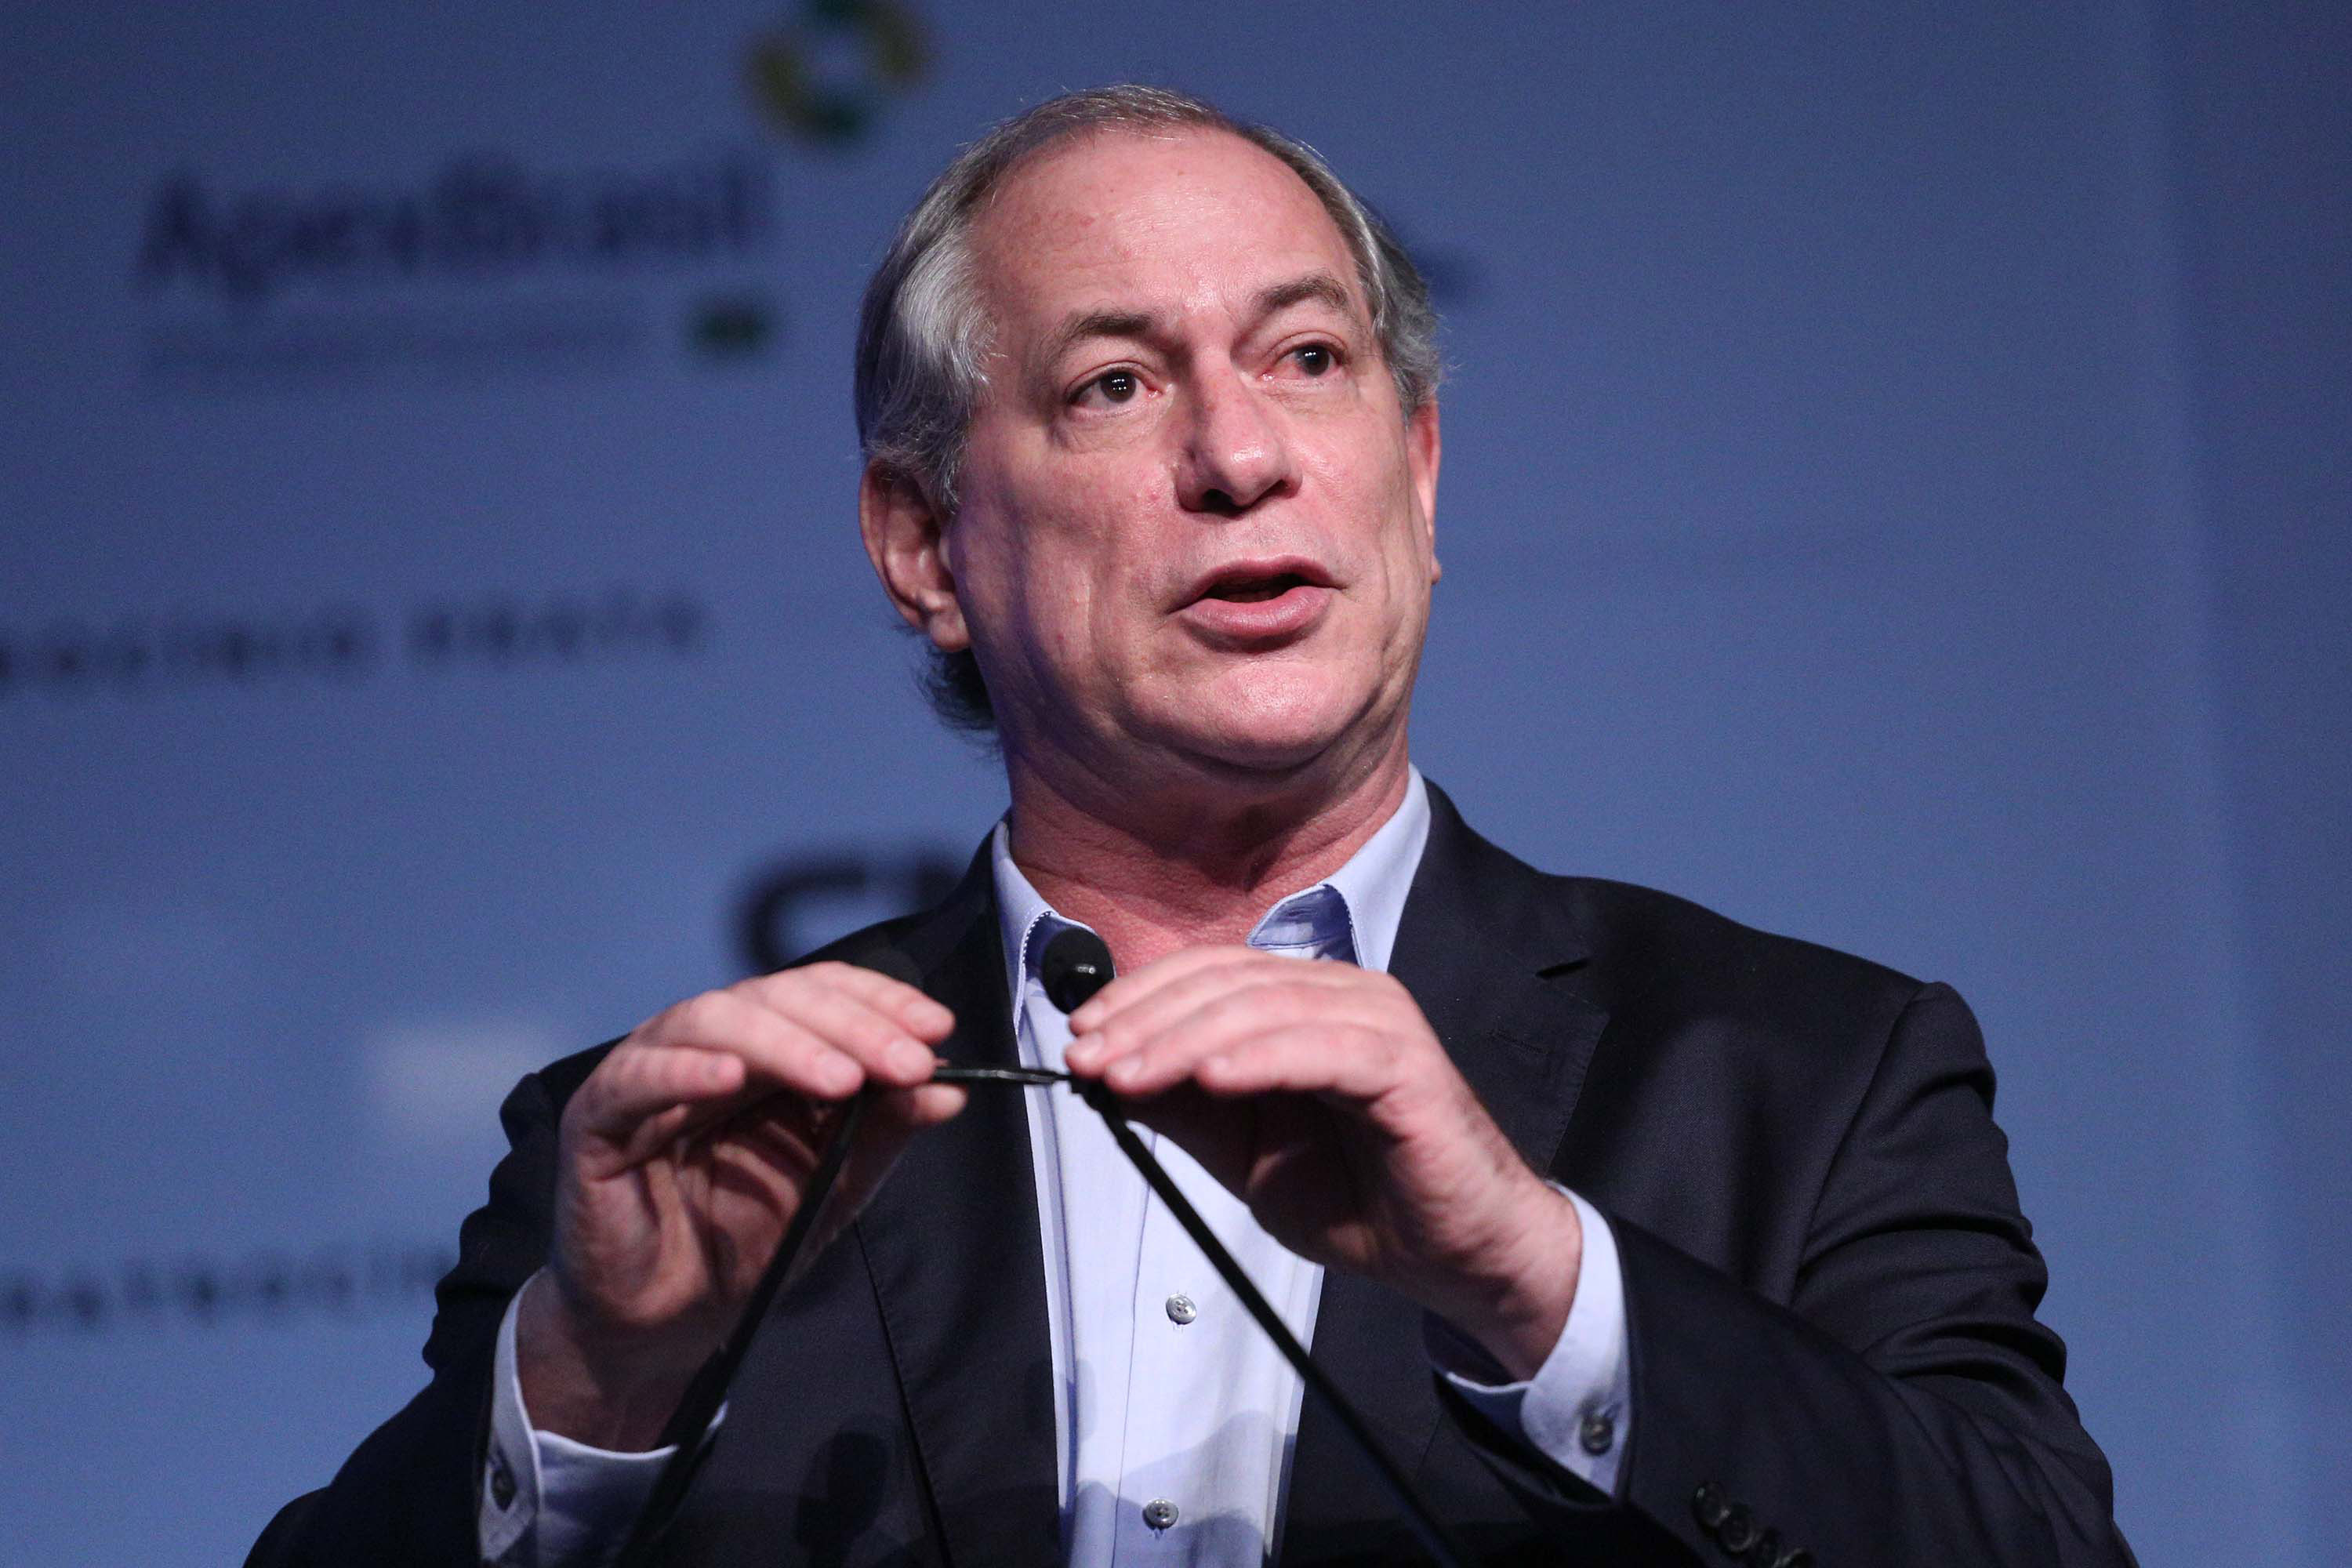 The presidential candidate, Ciro Gomes, participates in the ⁄nica FÛrum 2018 at the WTC Events Center Theater in S„o Paulo (SP), this Monday (18th), promoted by the Union of Canadian Industries. de-AÁ˙car (⁄NICA), with the participation of several pre-candidates for the presidency of the republic.  Renato S. Cerqueira/Futura Press